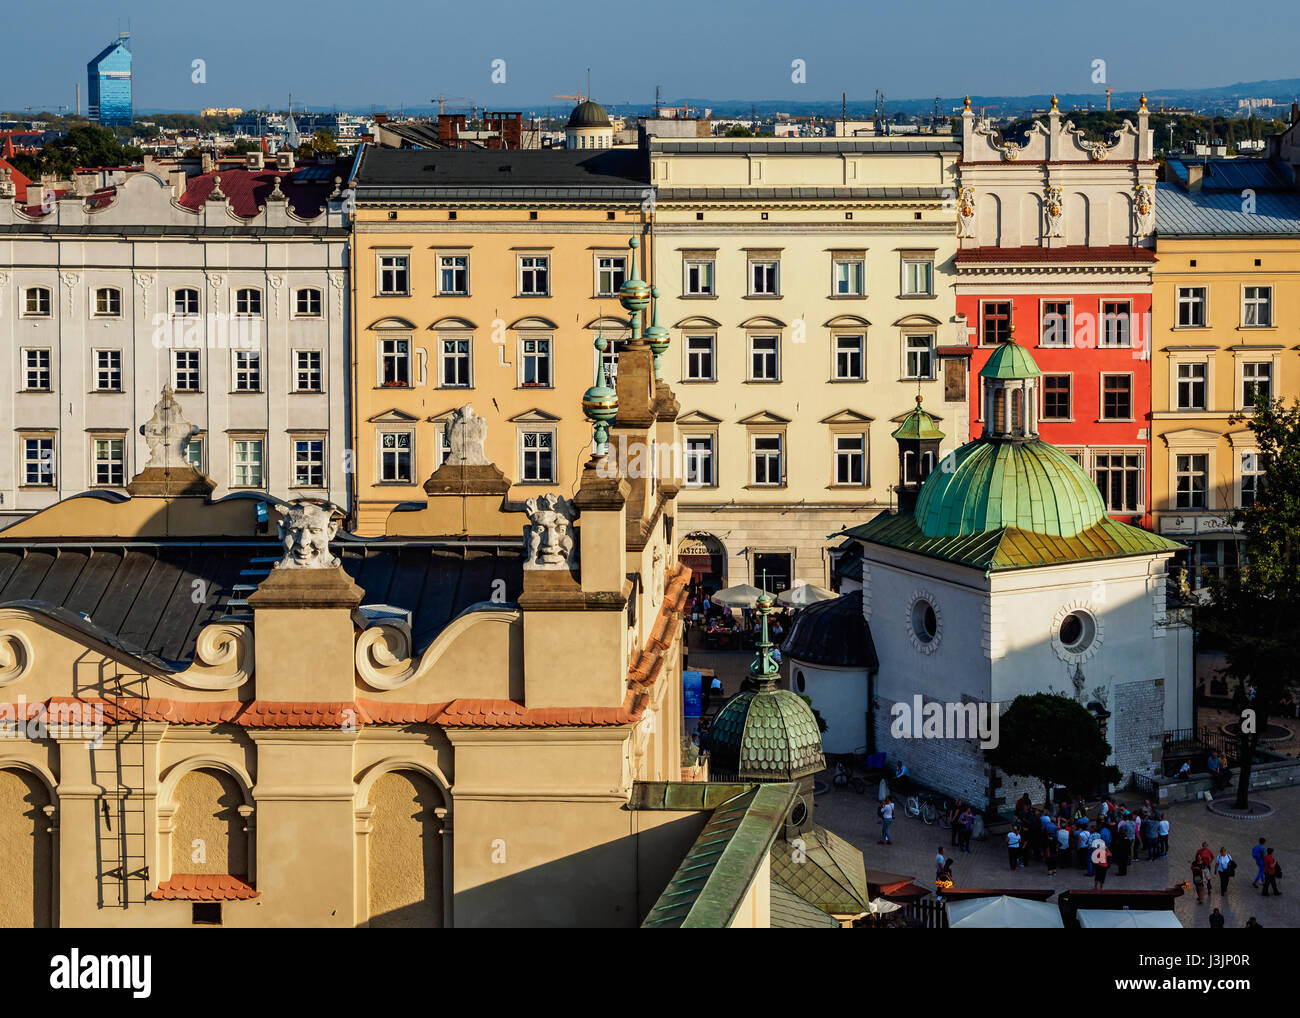 Poland, Lesser Poland Voivodeship, Cracow, Elevated view of the Main Market Square Stock Photo